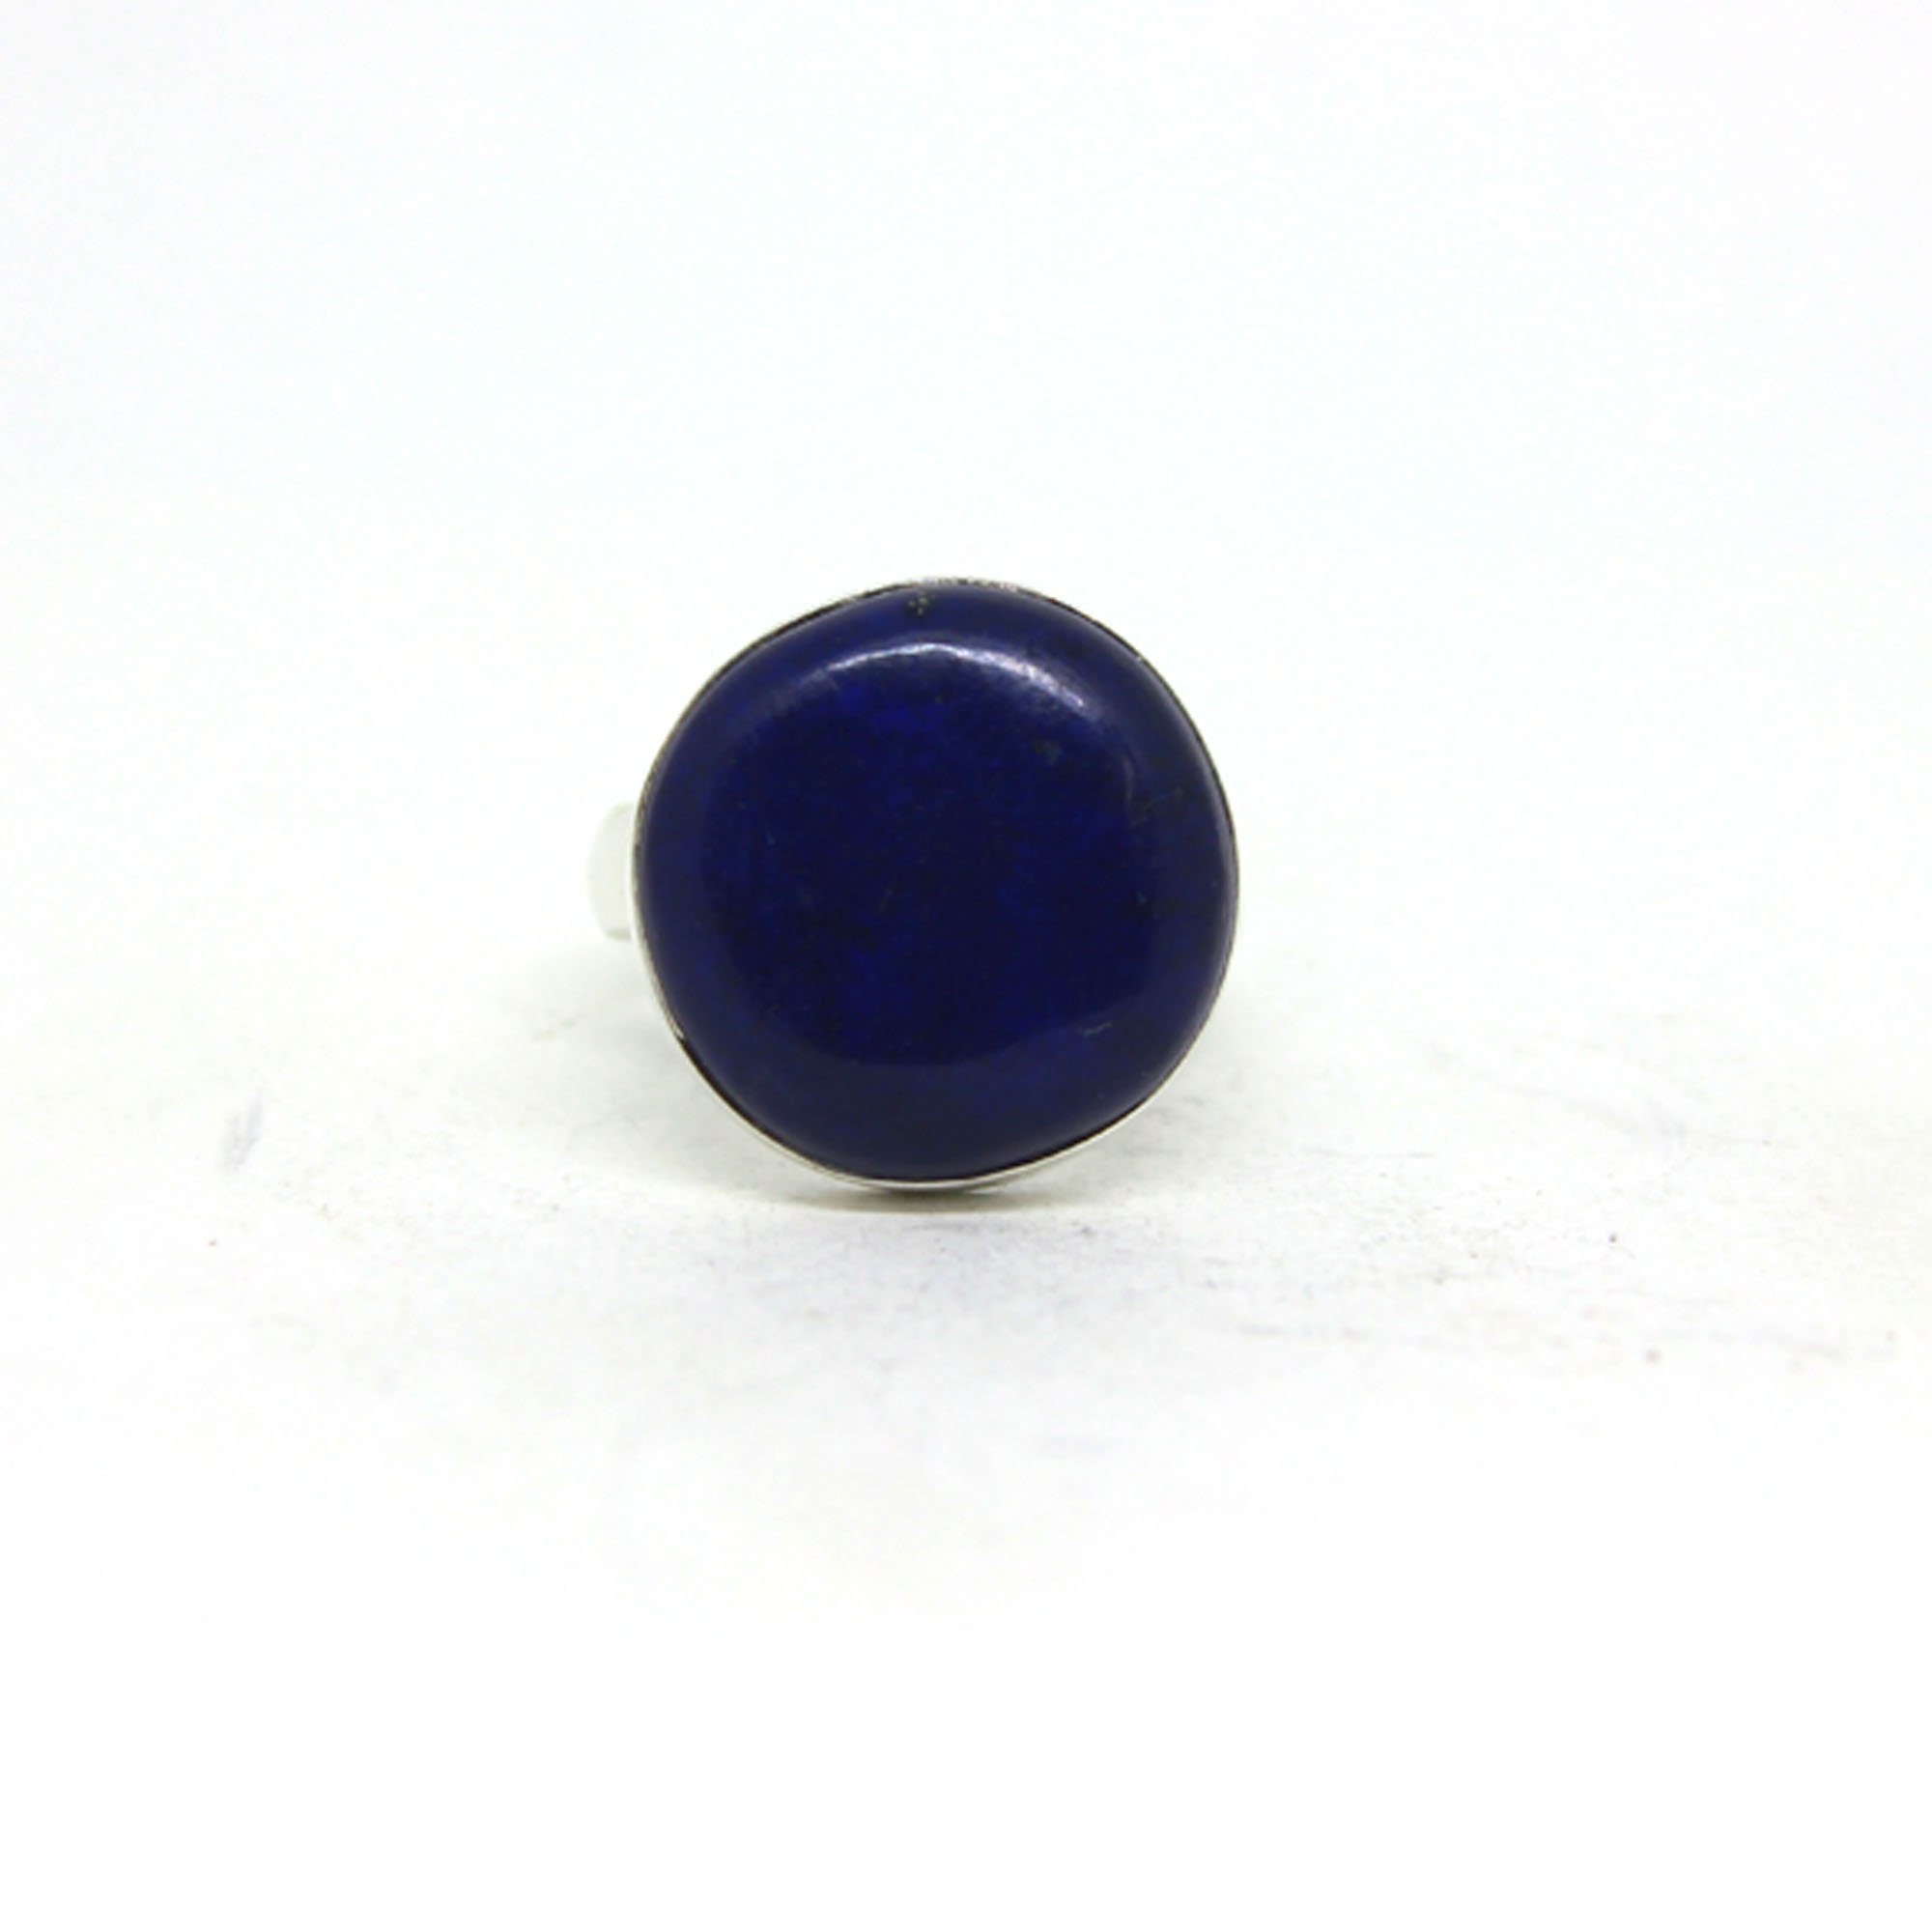 Lapis Lazuli 925 Sterling Silver Stackable Ring Jewelry S US 8.5